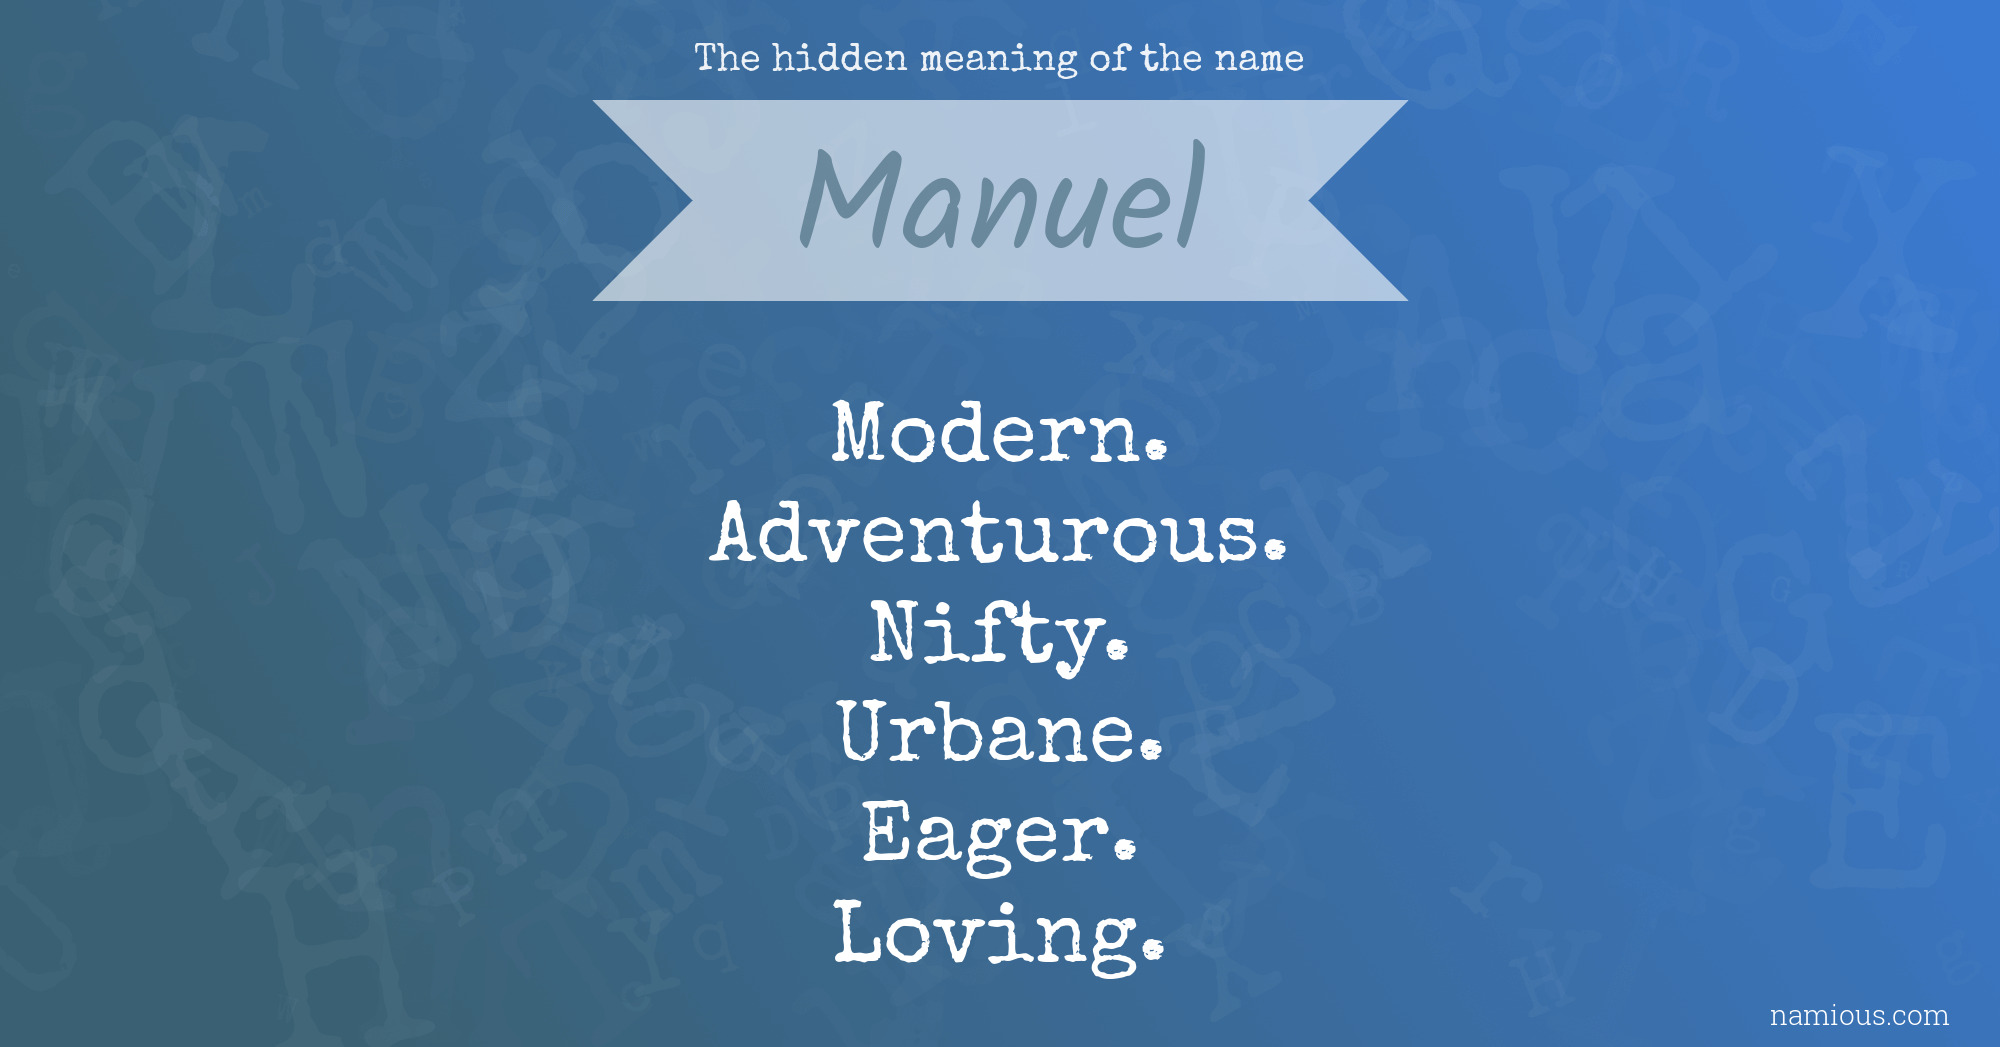 The hidden meaning of the name Manuel